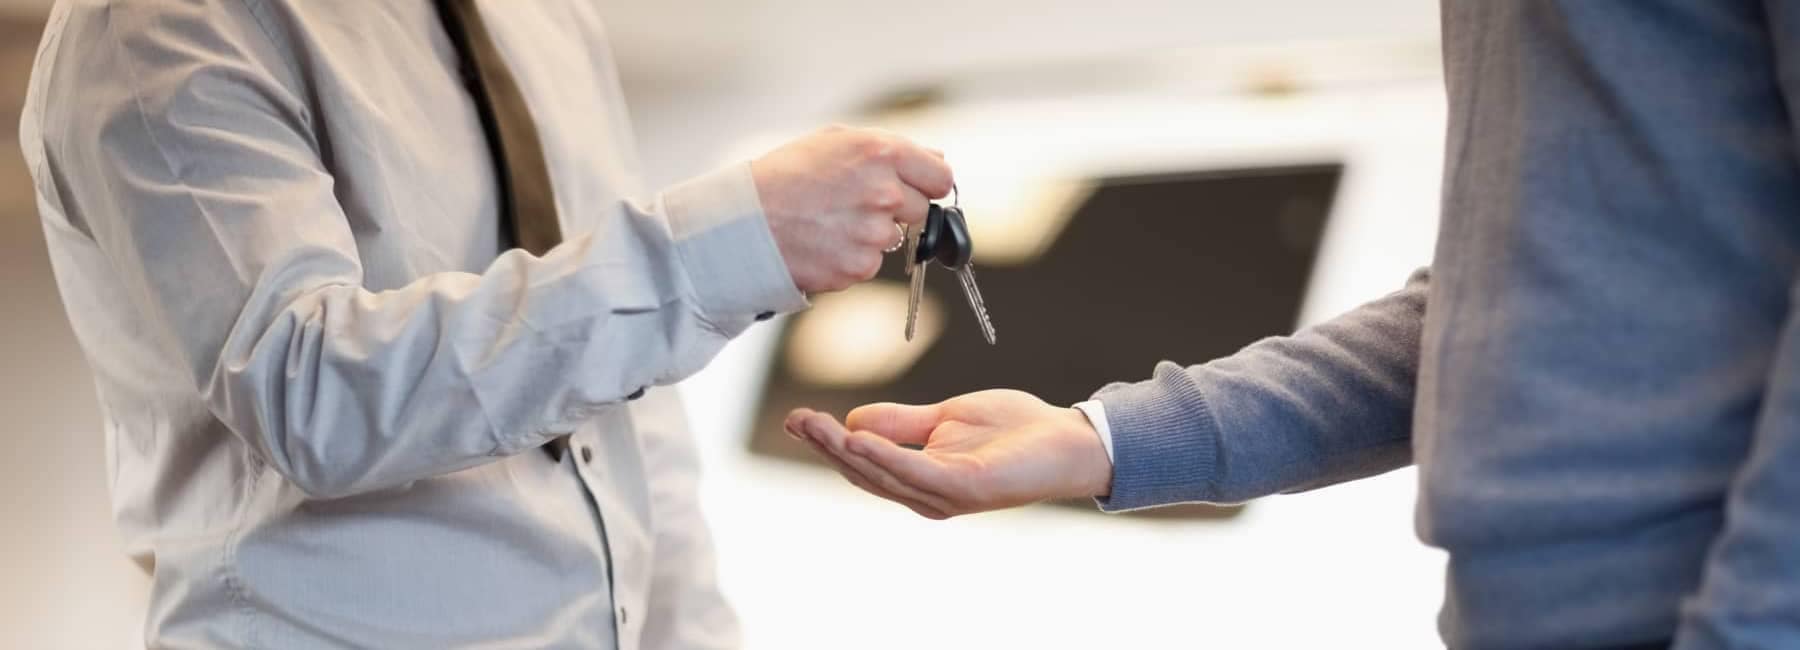 Person handing other person car keys 2